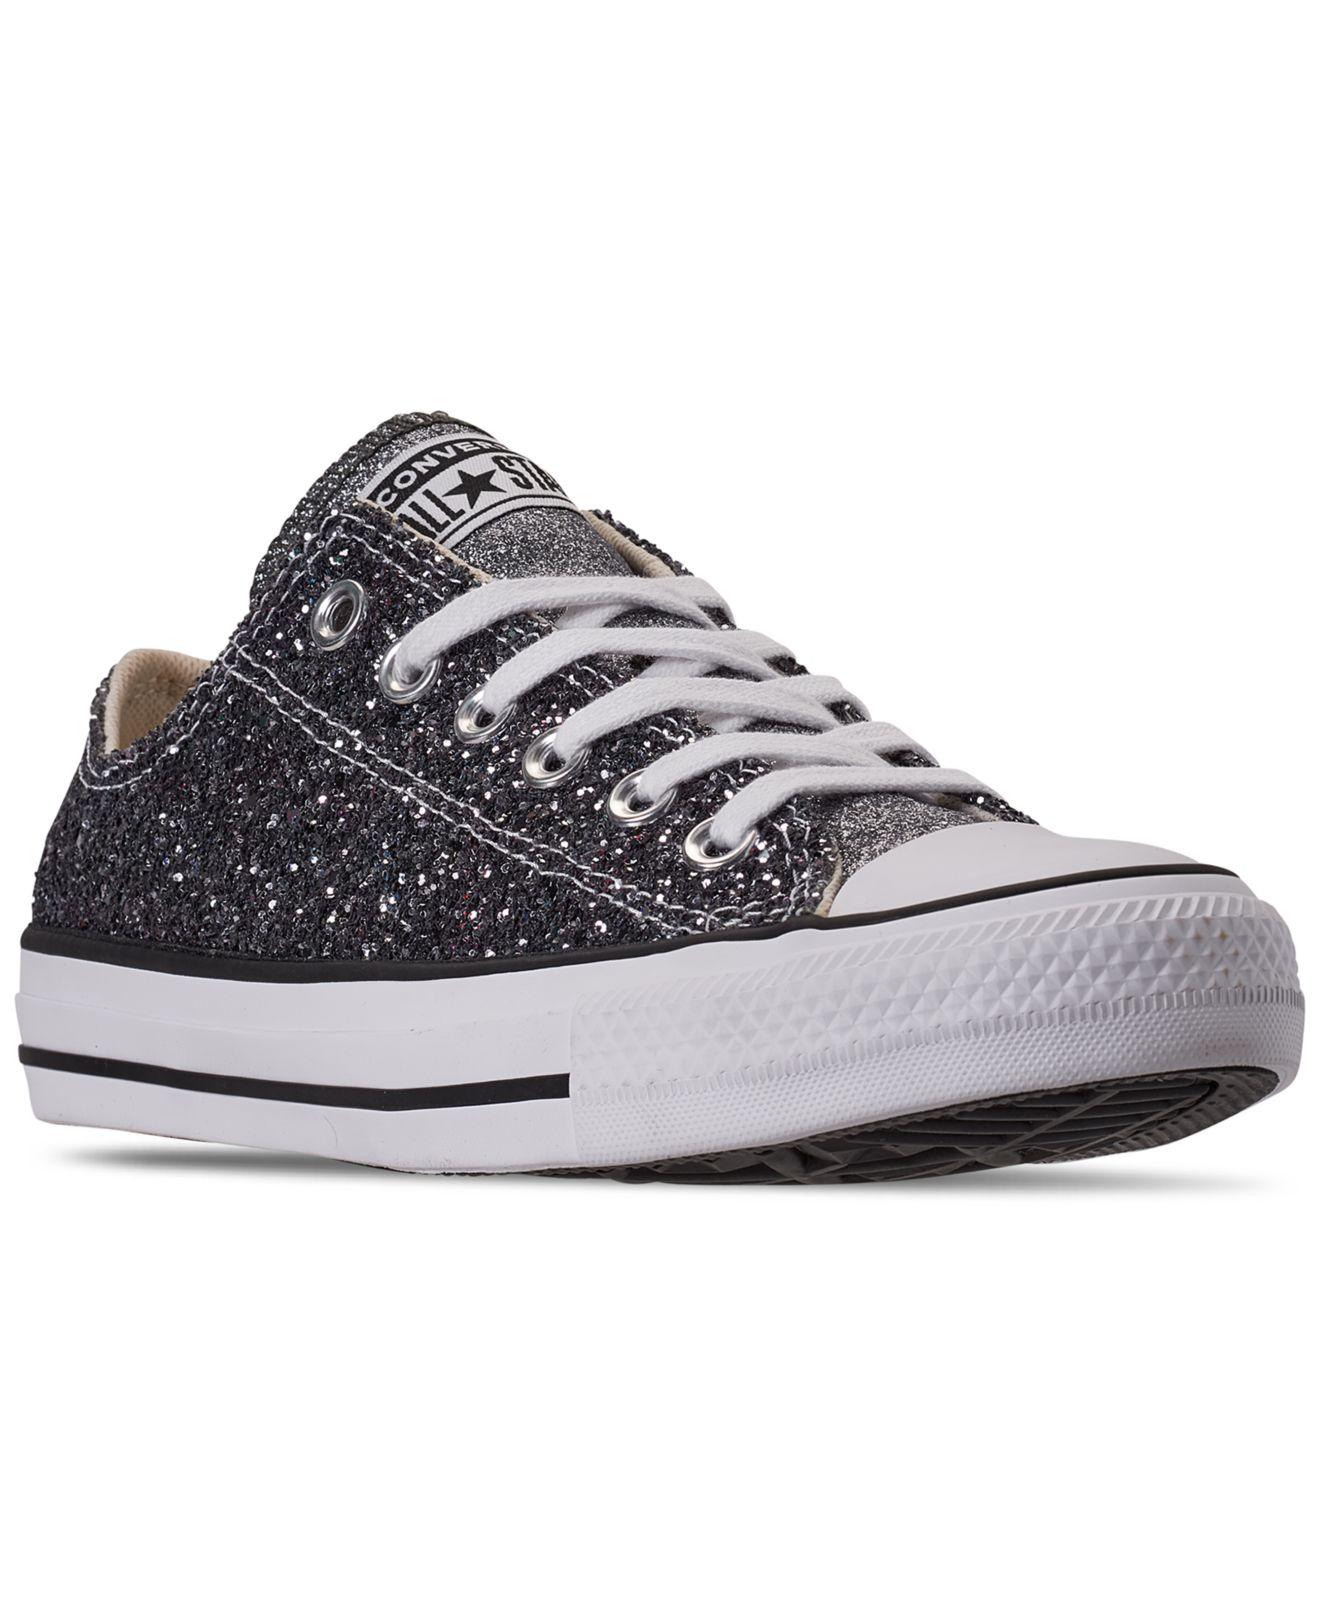 Converse Canvas Chuck Taylor All Star Galaxy Dust Ox Low Top Casual  Sneakers From Finish Line in Silver/Black/White (Black) - Lyst